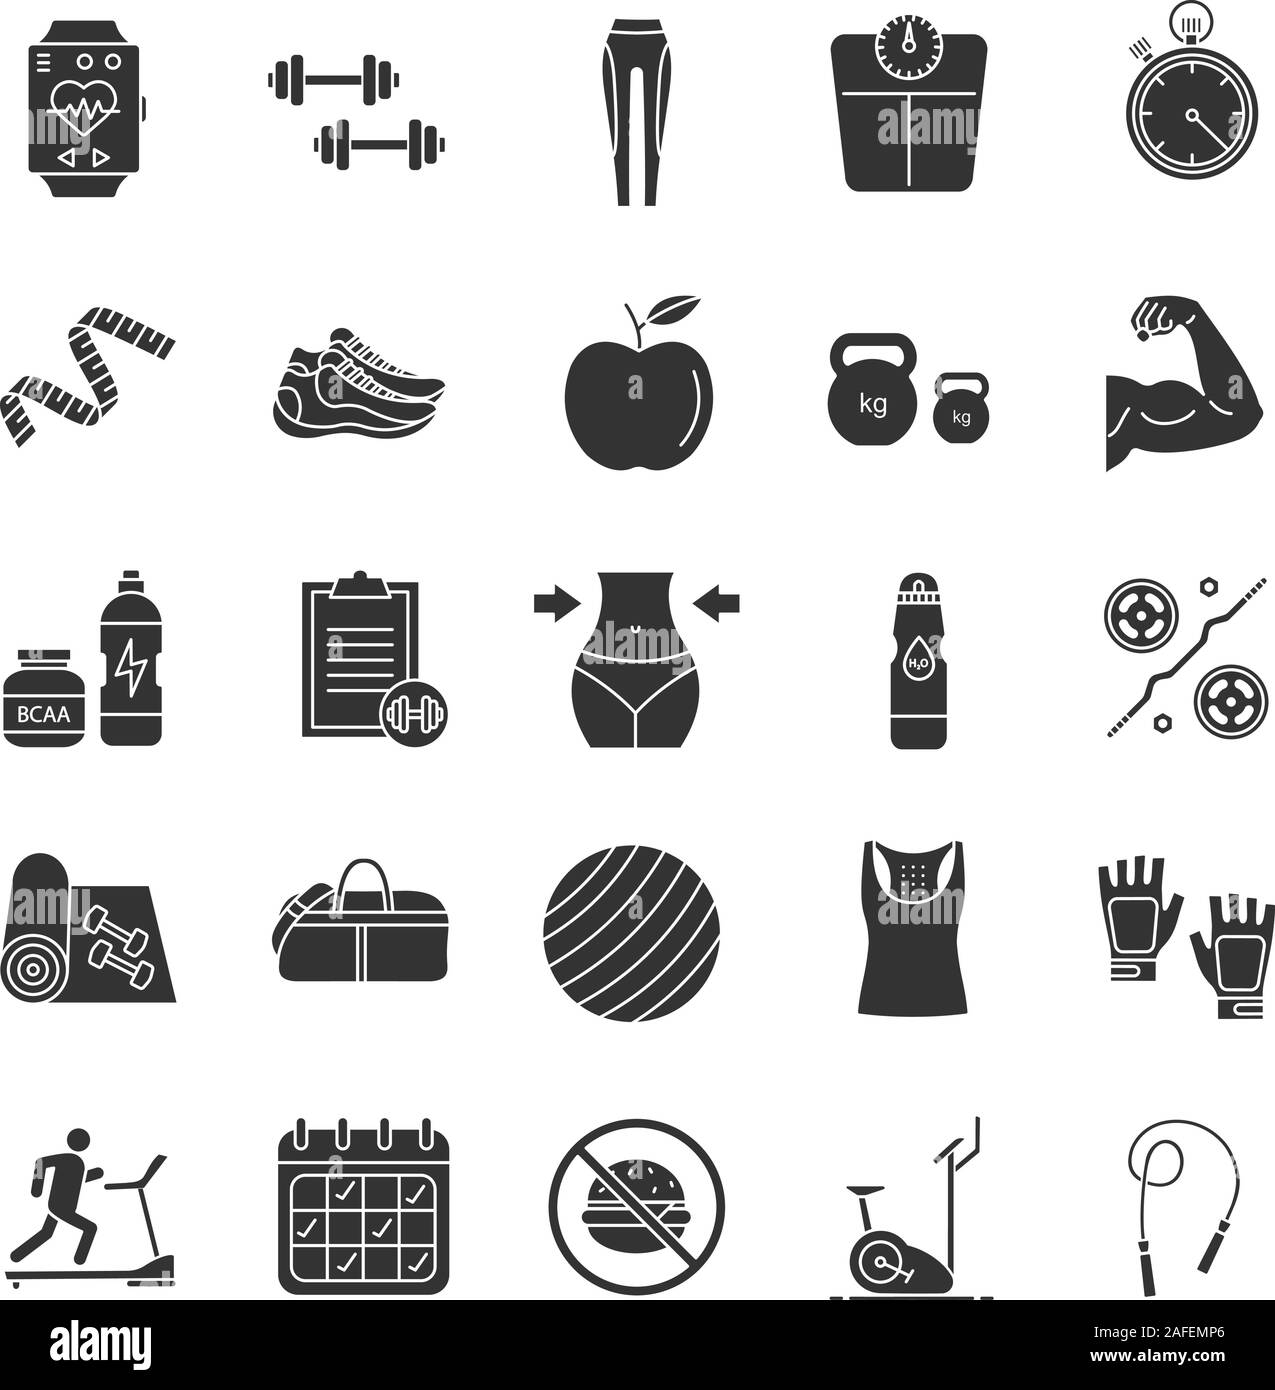 Fitness glyph icons set. Sports equipment. Exercise machines, barbells, dumbbells, clothes. Silhouette symbols. Vector isolated illustration Stock Vector